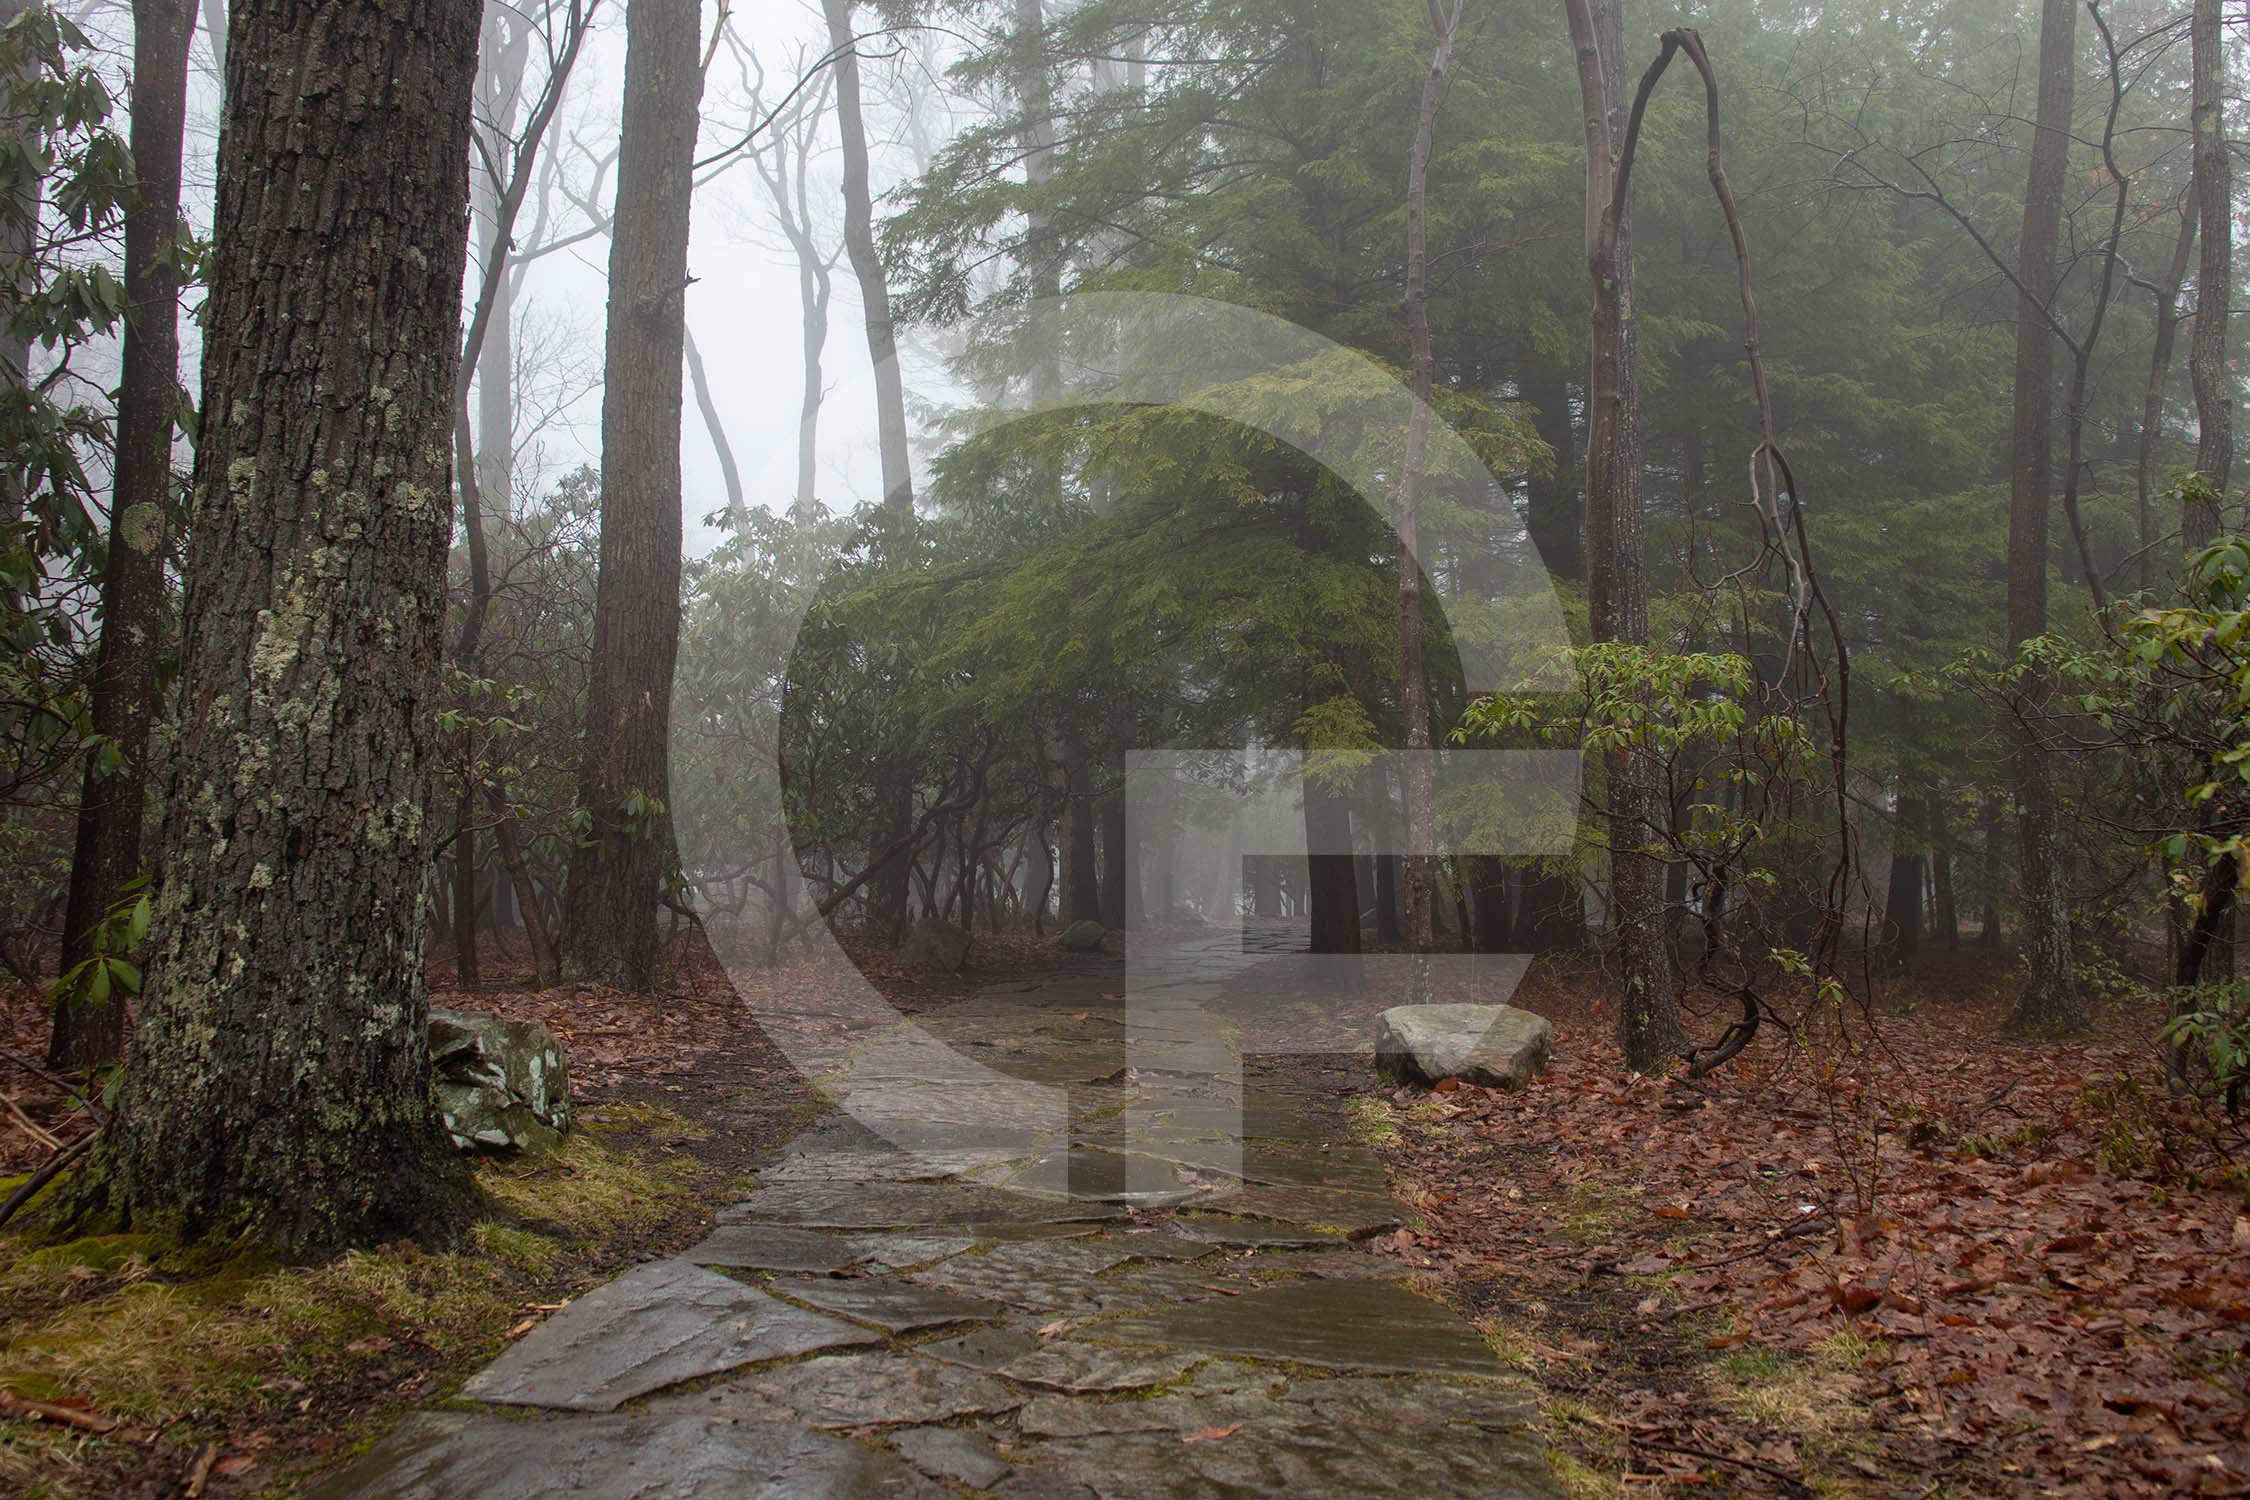 stone path winding into the foggy forest